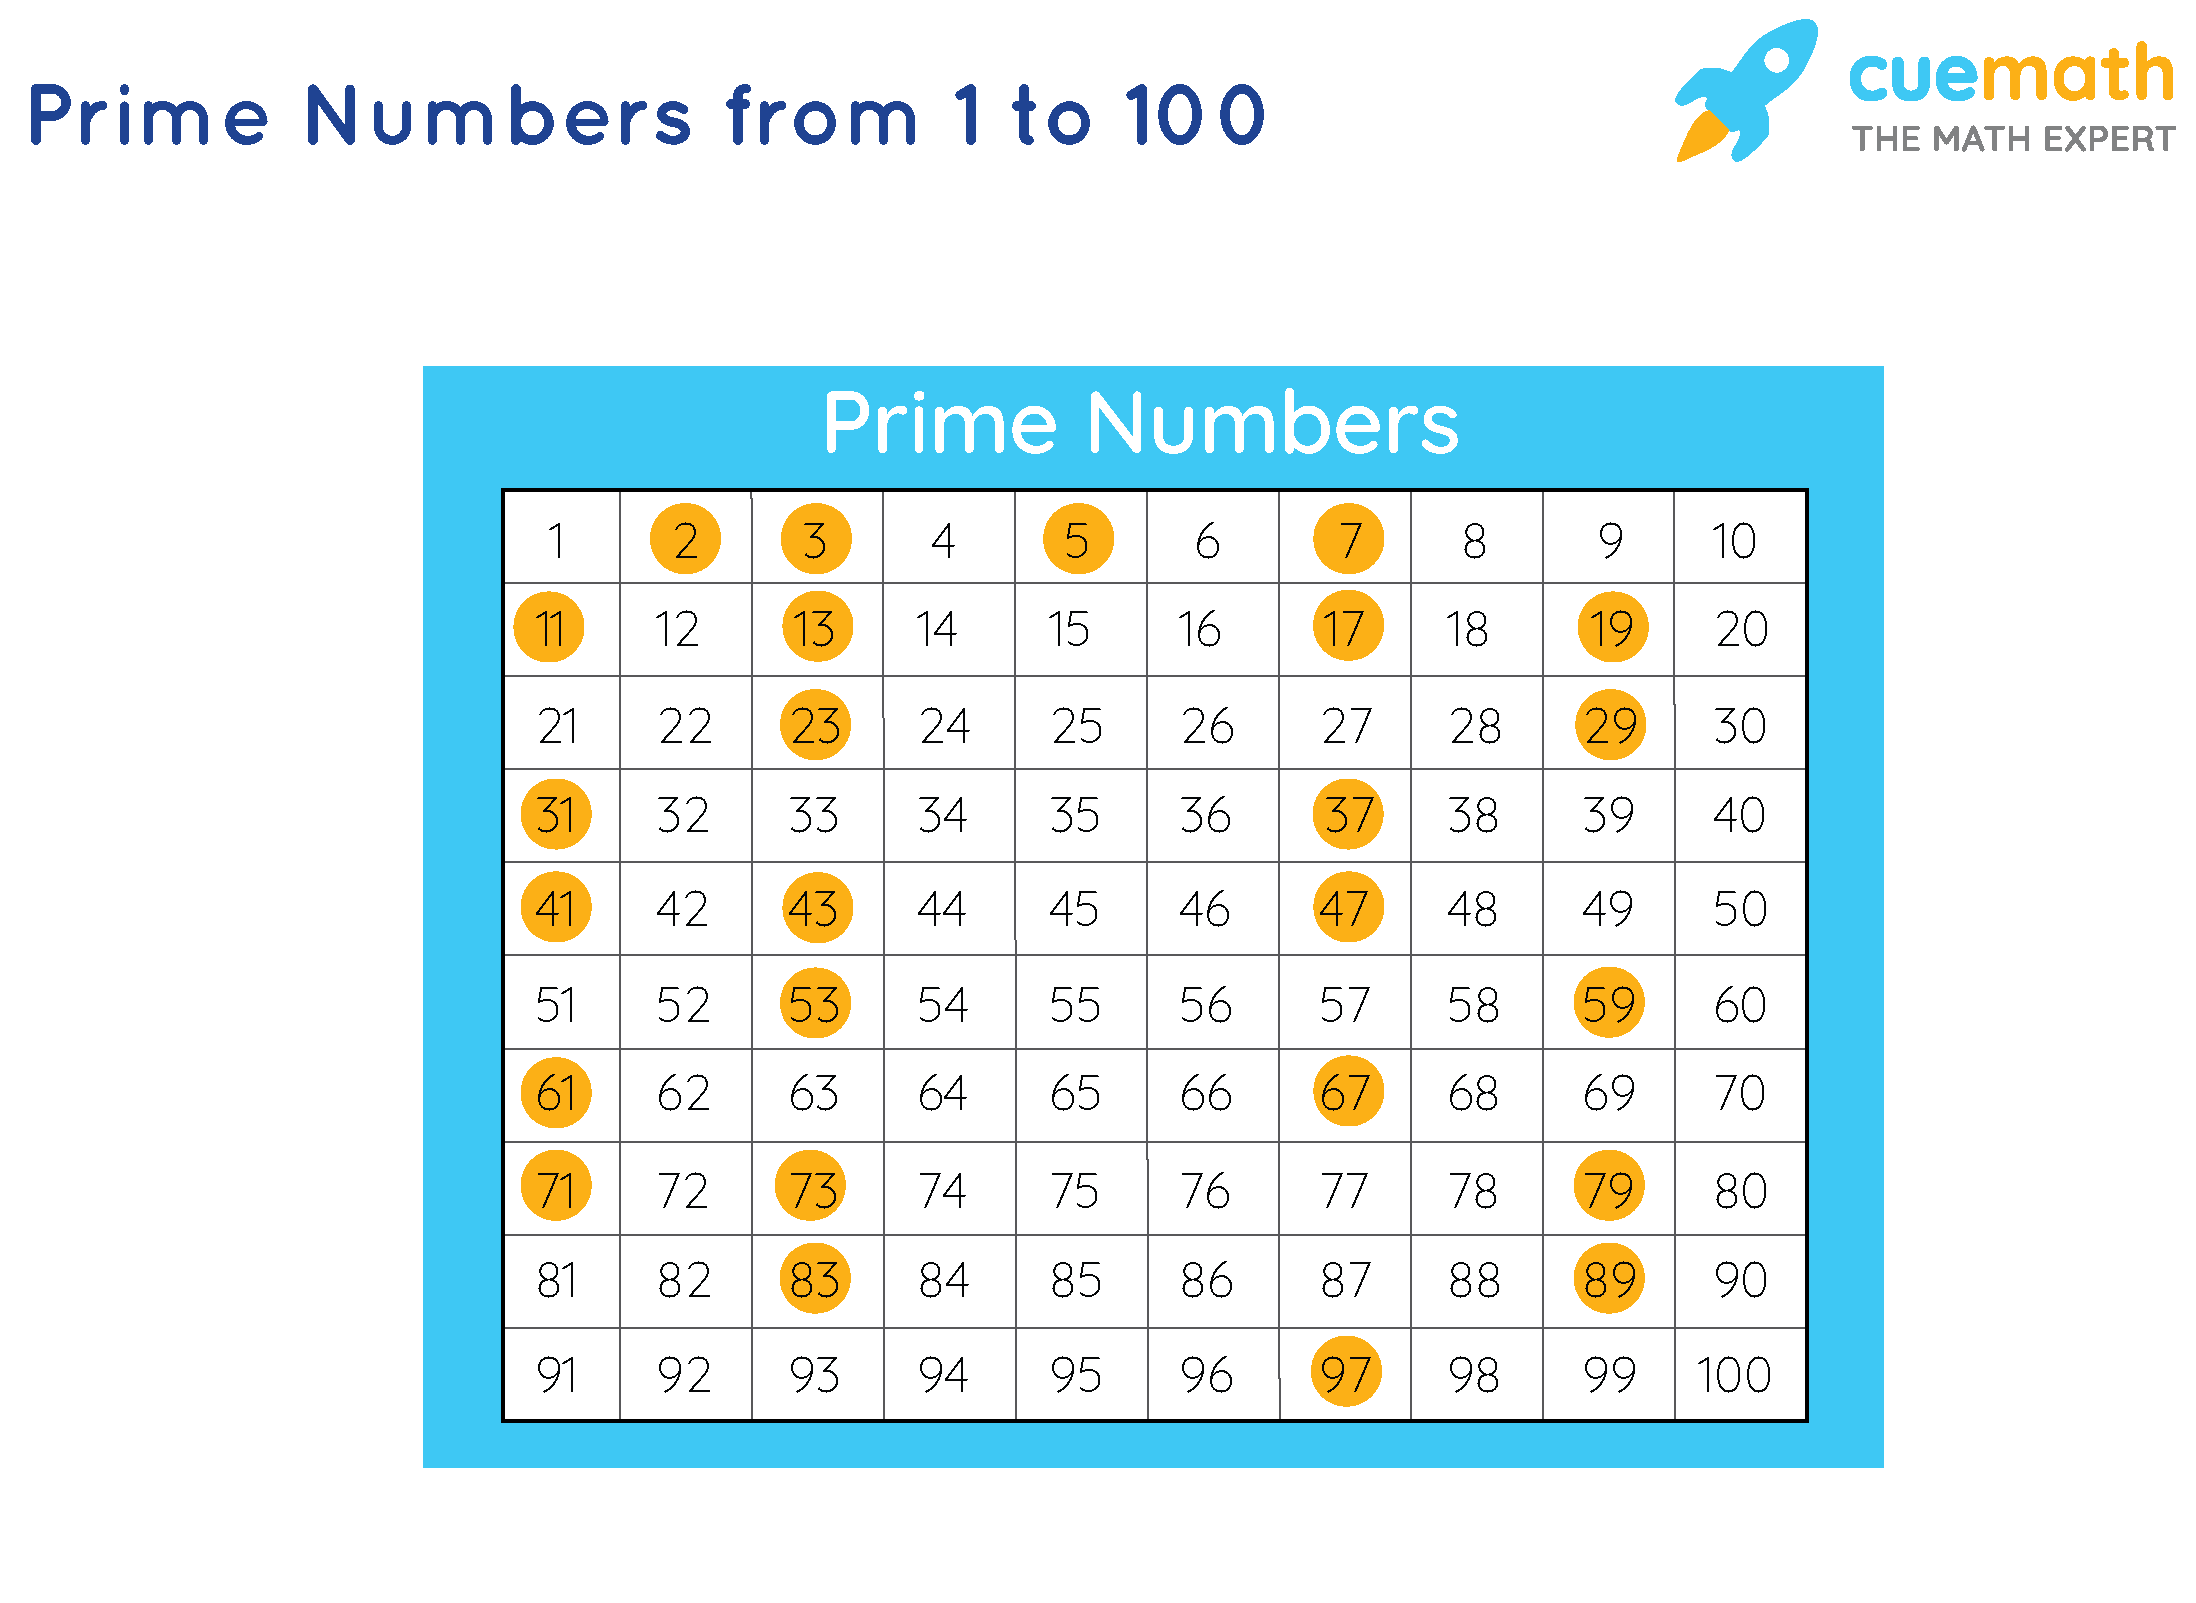 what is the greatest prime number between 1 and 100